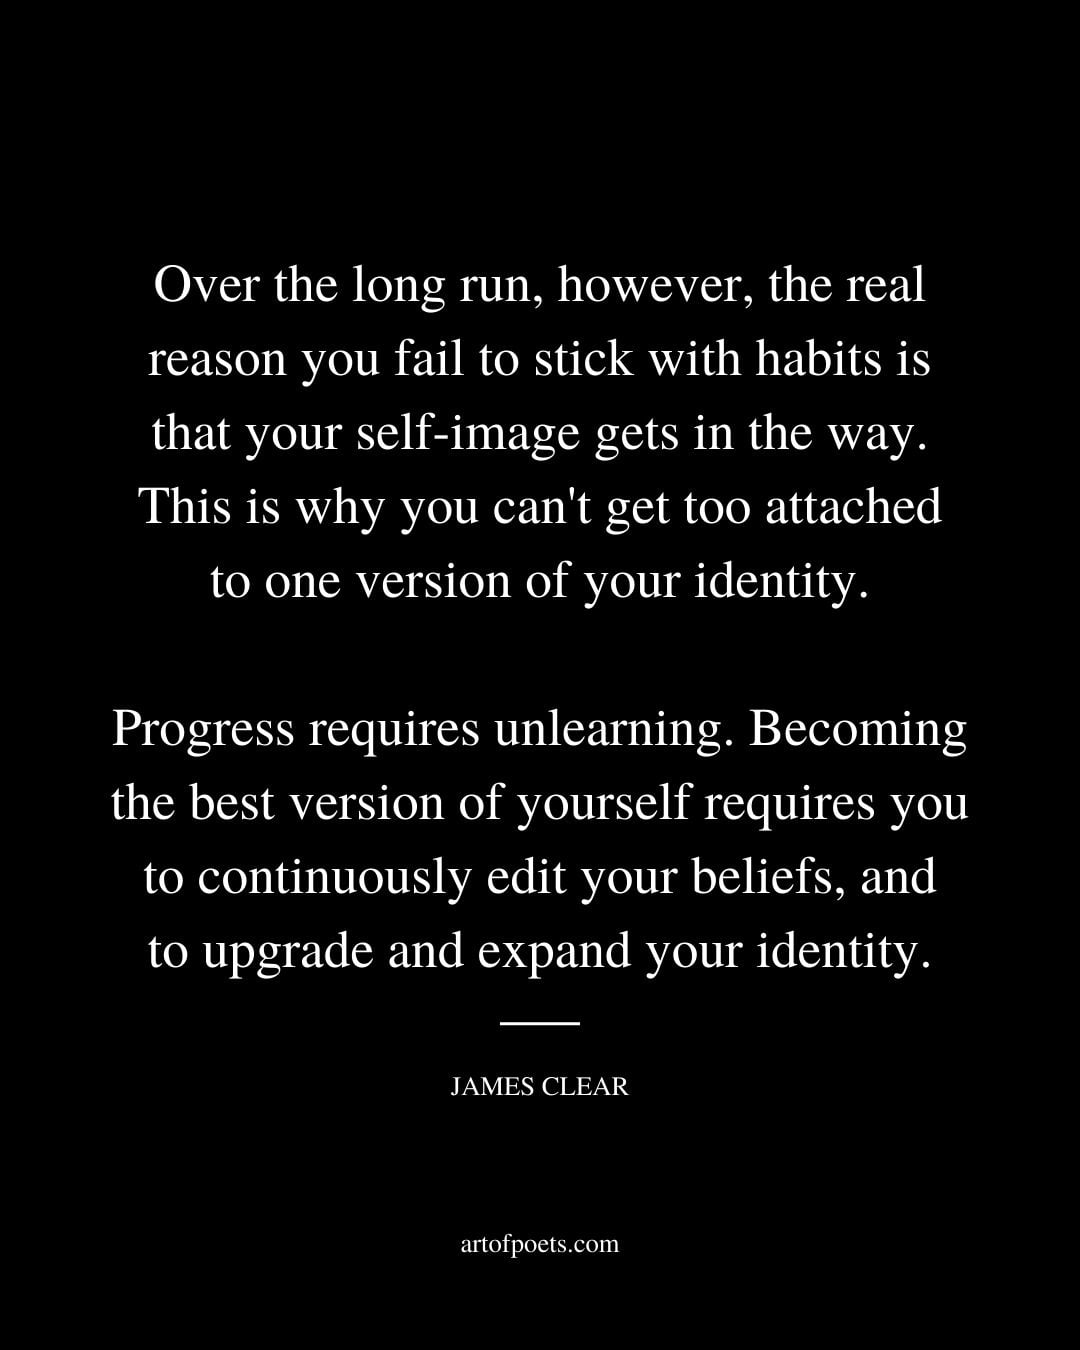 Over the long run however the real reason you fail to stick with habits is that your self image gets in the way. This is why you cant get too attached to one version of your identity